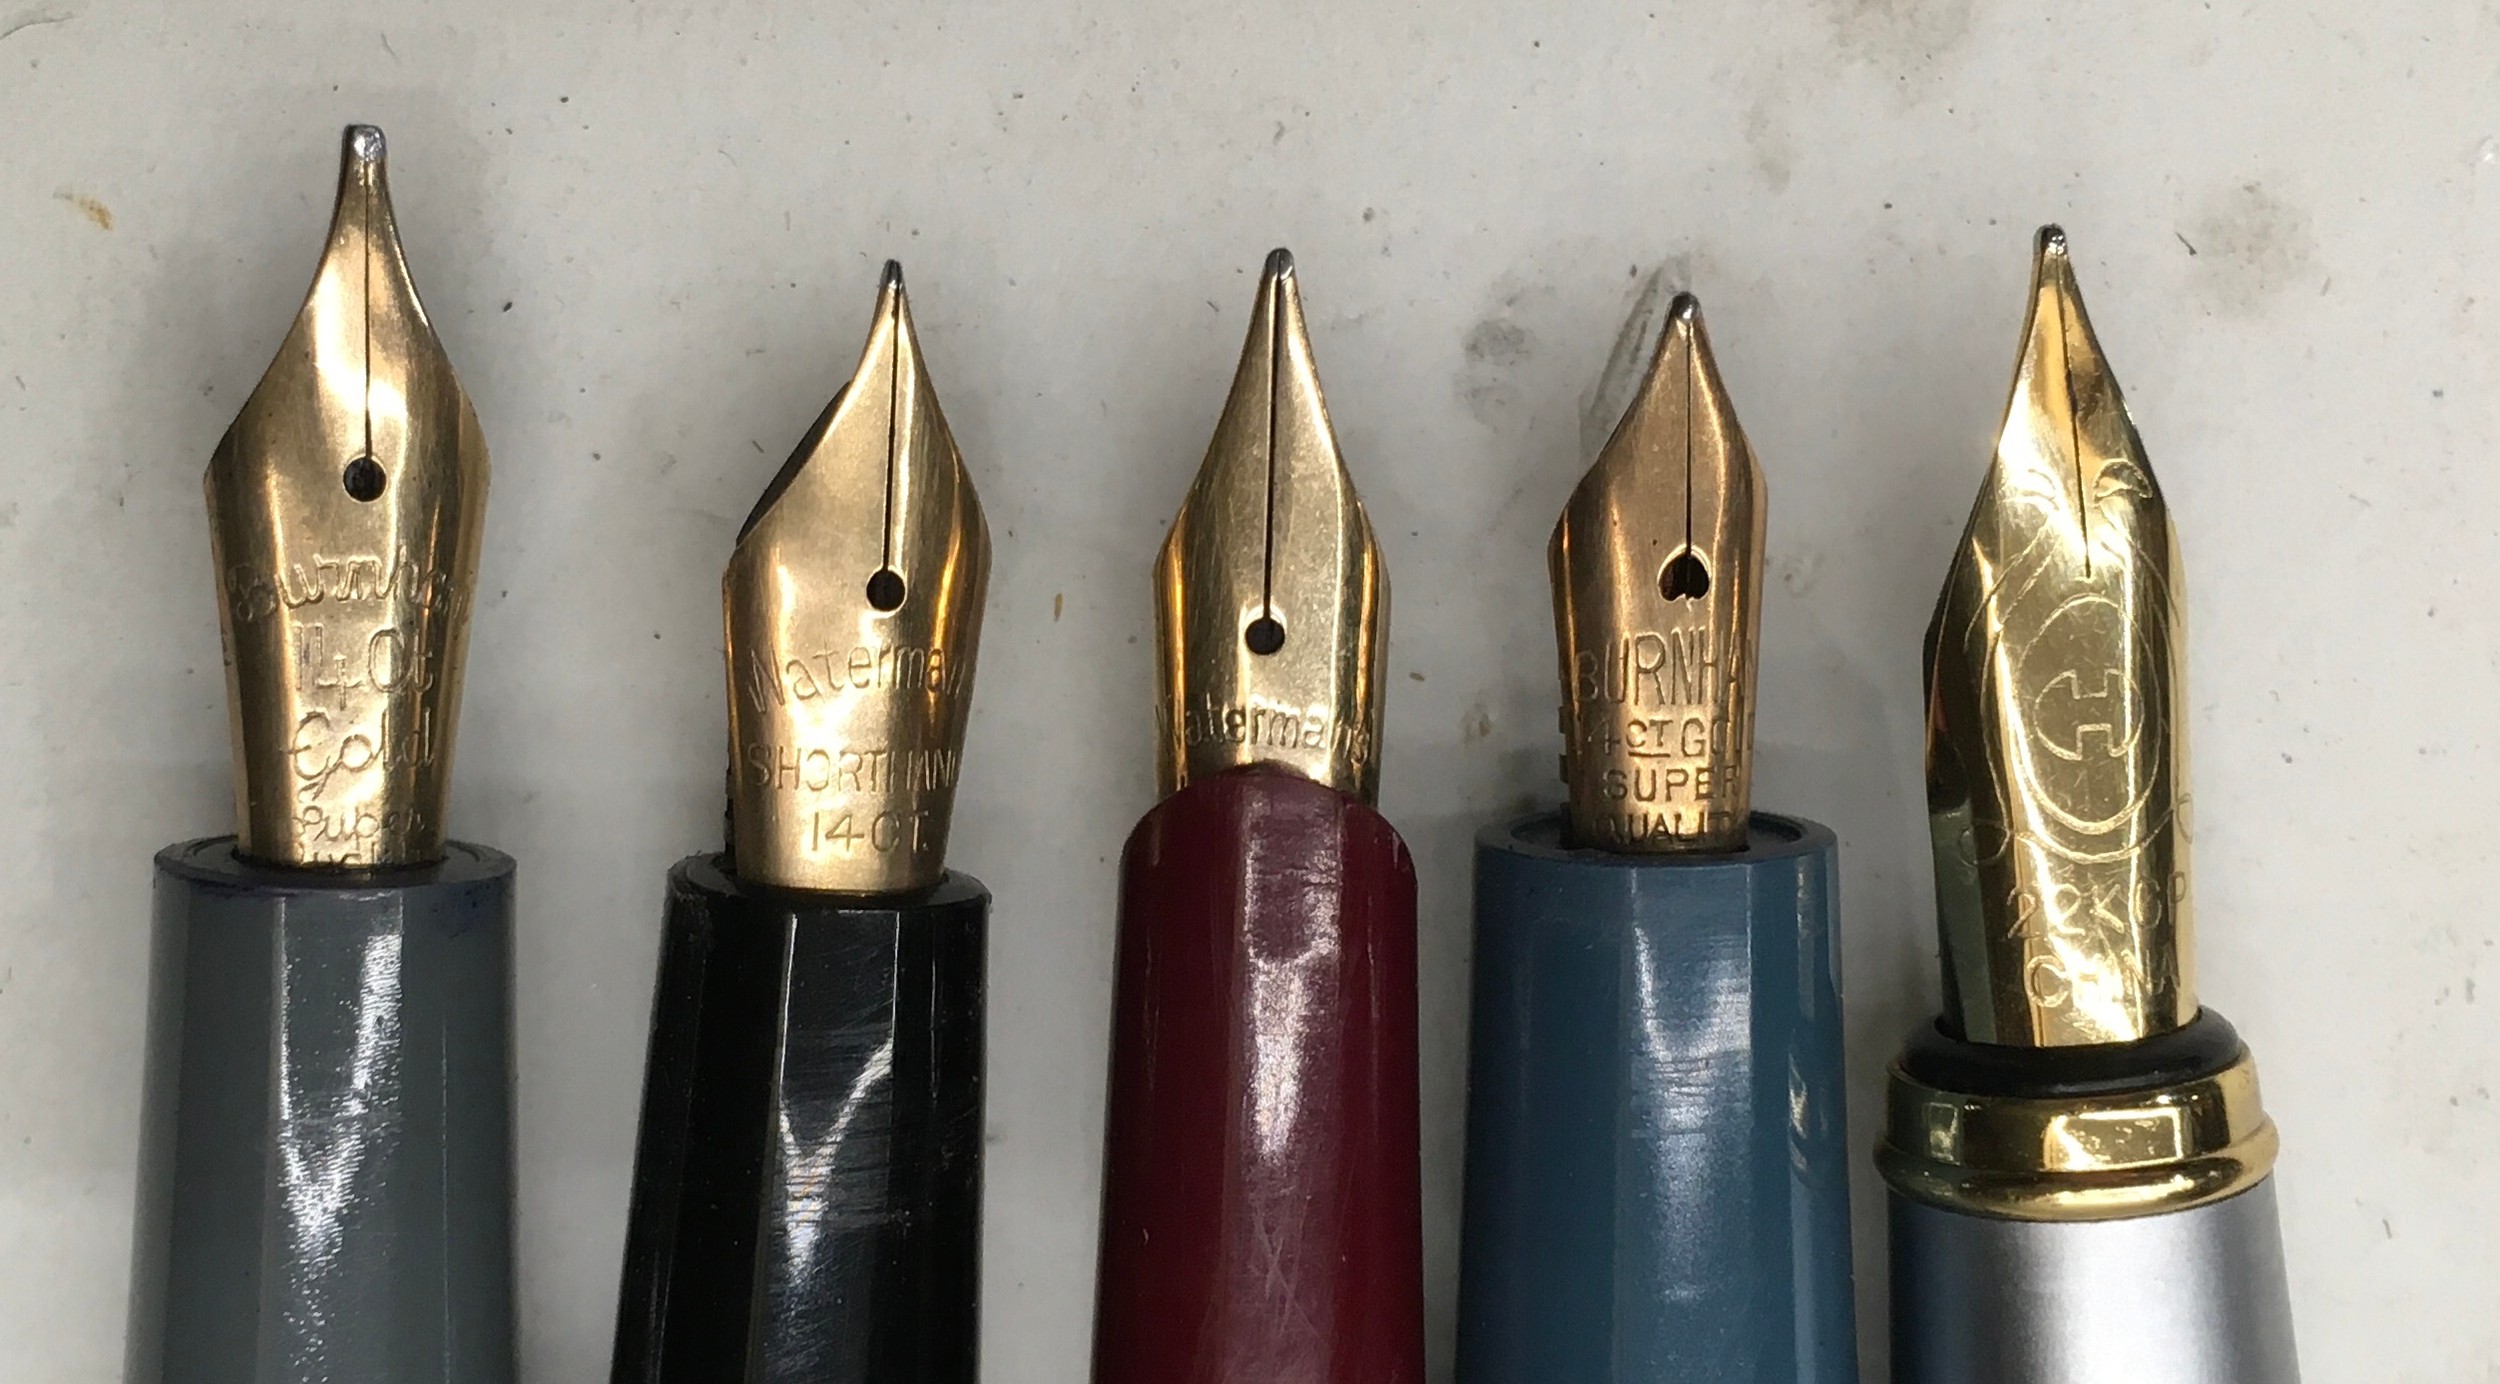 Small collection of Fountain pens including Waterman. Some with advertised gold nibs. 5 in all - Image 2 of 2